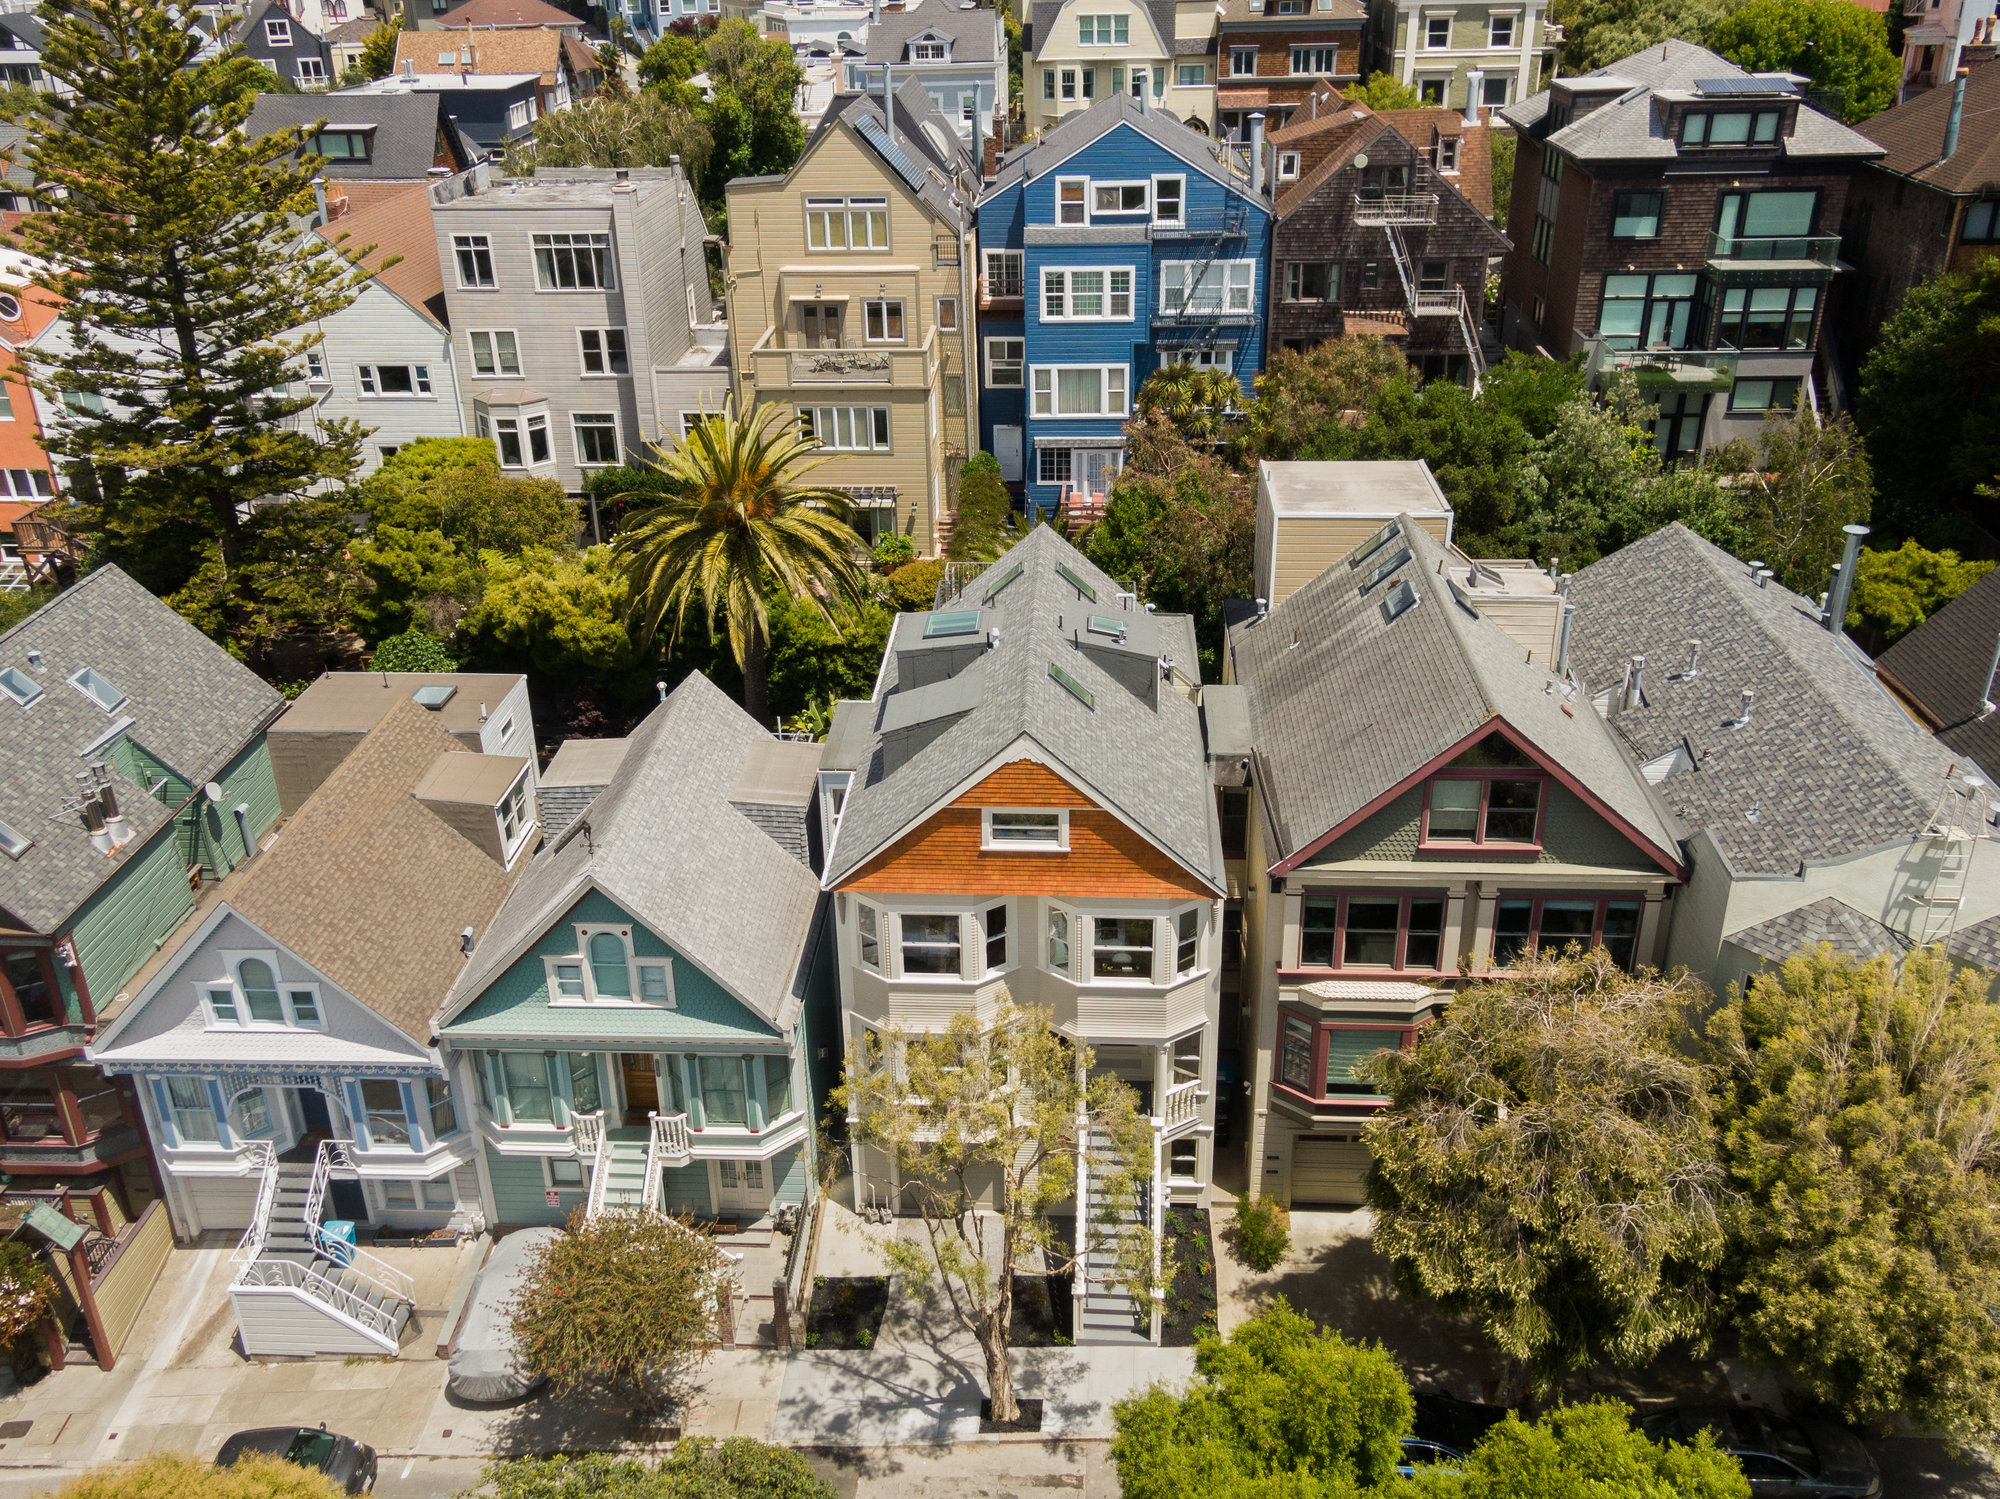 Property Photo: Aerial photo of 234 Downey. Sweet row of Victorian style homes. 